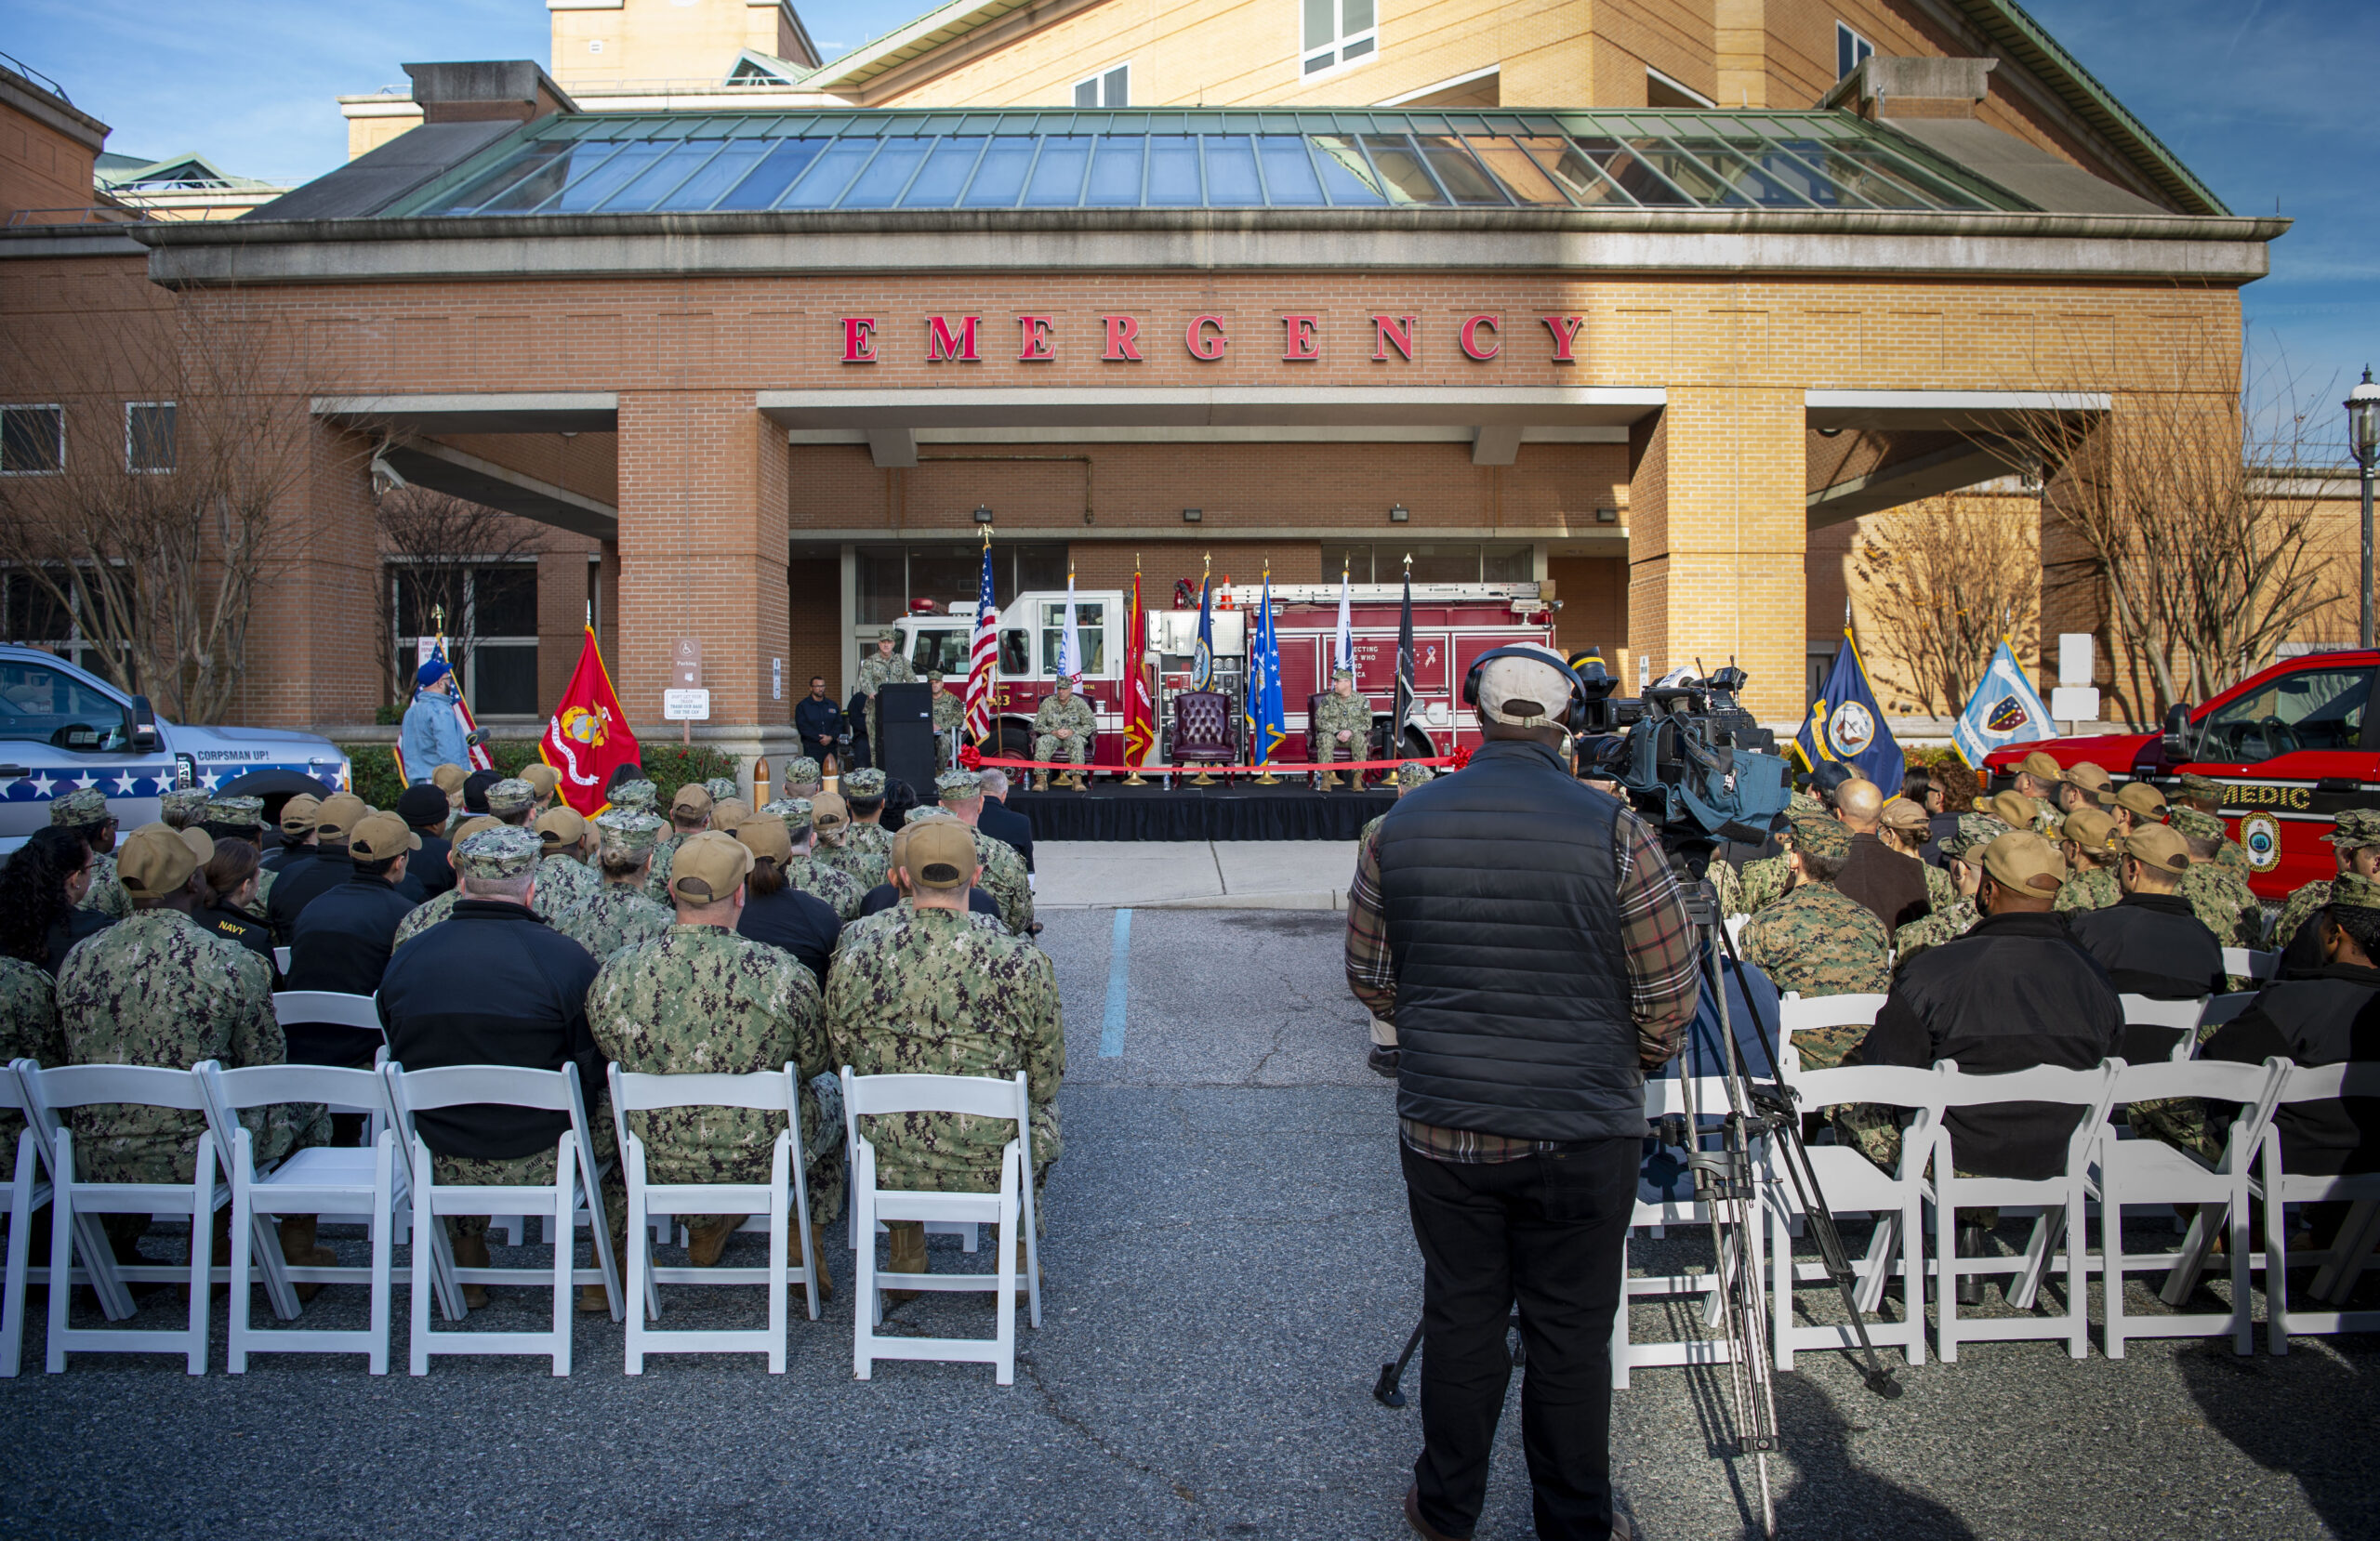 Surgeon General of the Navy Rear Adm. Darin Via speaks during a trauma center ribbon cutting ceremony in front of Naval Medical Center Portsmouth’s (NMCP) emergency room entrance on Dec. 8. The trauma center ribbon cutting was held in celebration of NMCP becoming the Navy’s first level two trauma center. (U.S. Navy photo by Mass Communication Specialist 2nd Class Dylan M. Kinee/Released)